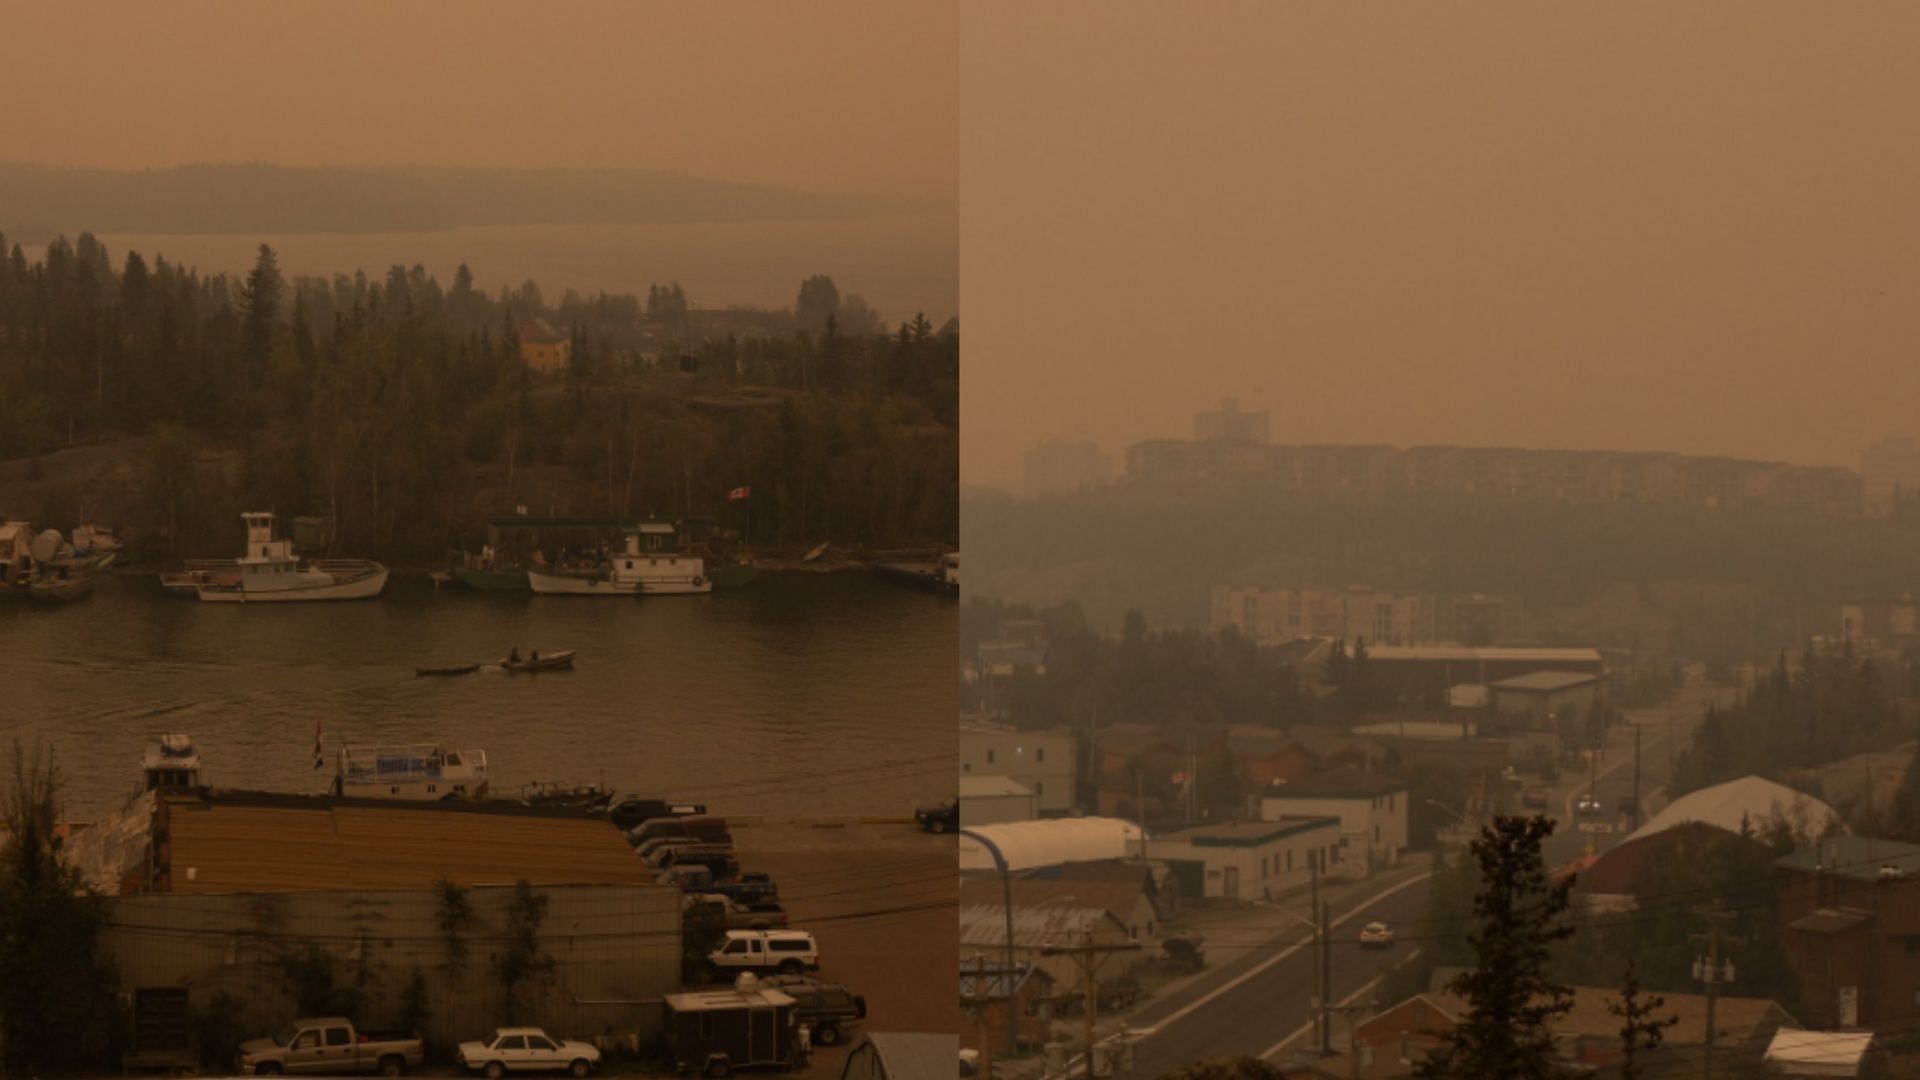 Pictures of Yellowknife shrouded in a blanket of smoke from the advancing wildfire. (Image via X/porterfieldlol)